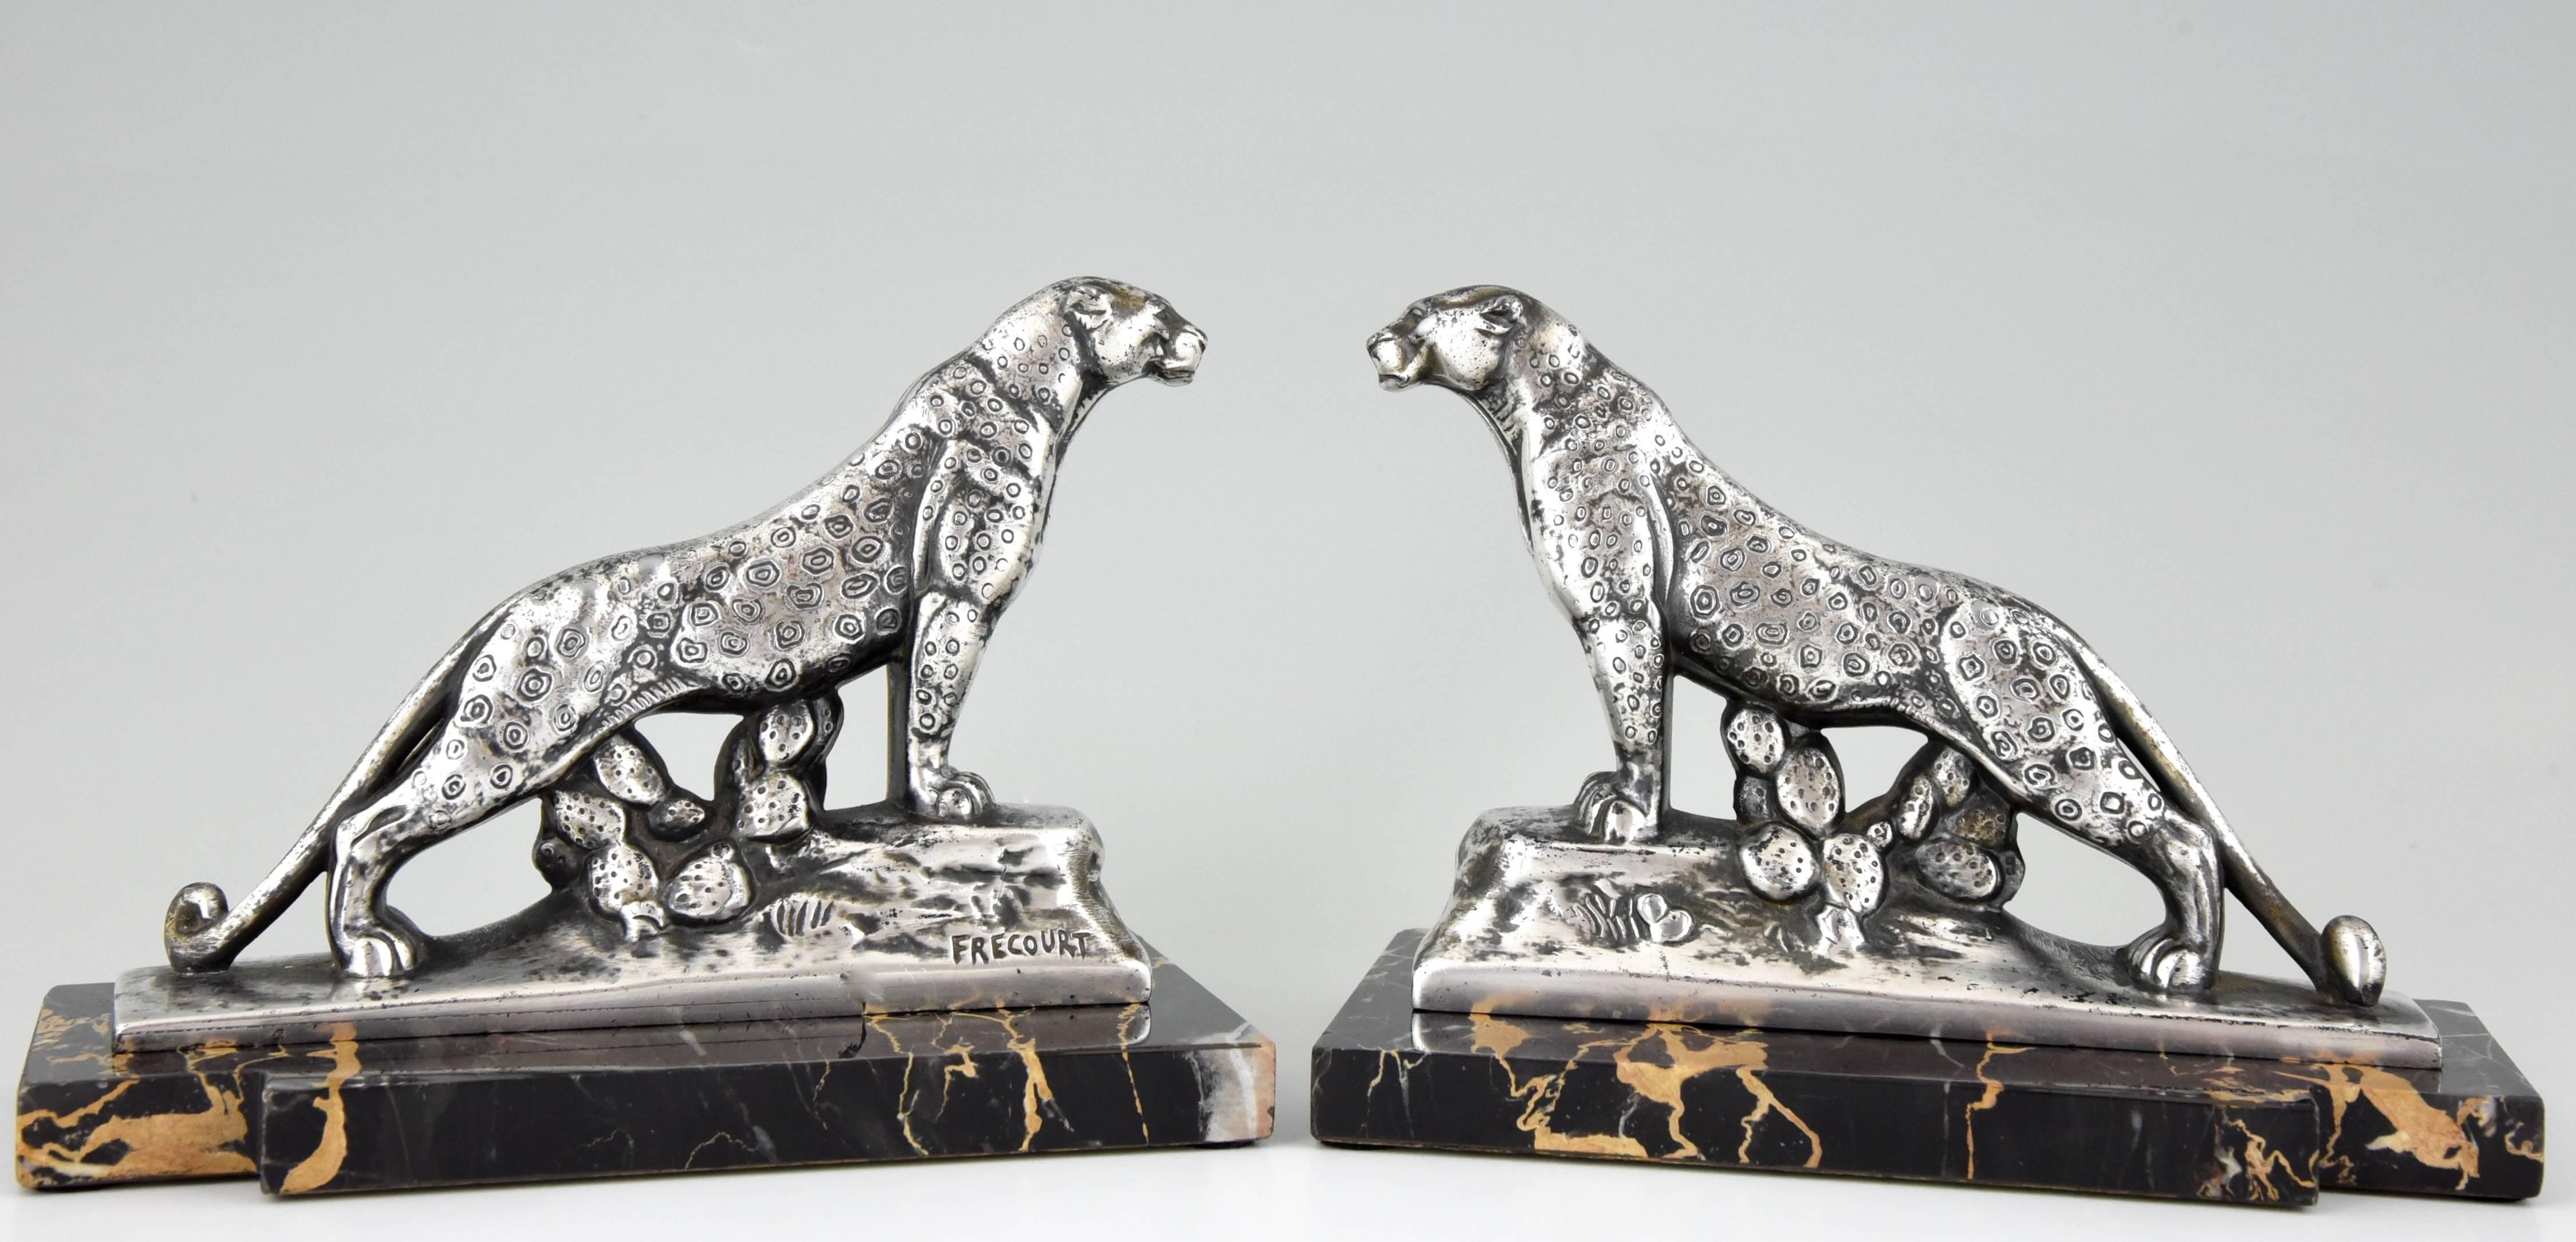 An elegant pair of Art Deco leopard panther bookends by the French artist Frecourt on a portor marble base. 

Artist/ Maker: Maurice Frecourt.
Signature/ Marks: Frecourt.
Style: Art Deco.
Date: 1930.
Material: Metal with silver patina. On